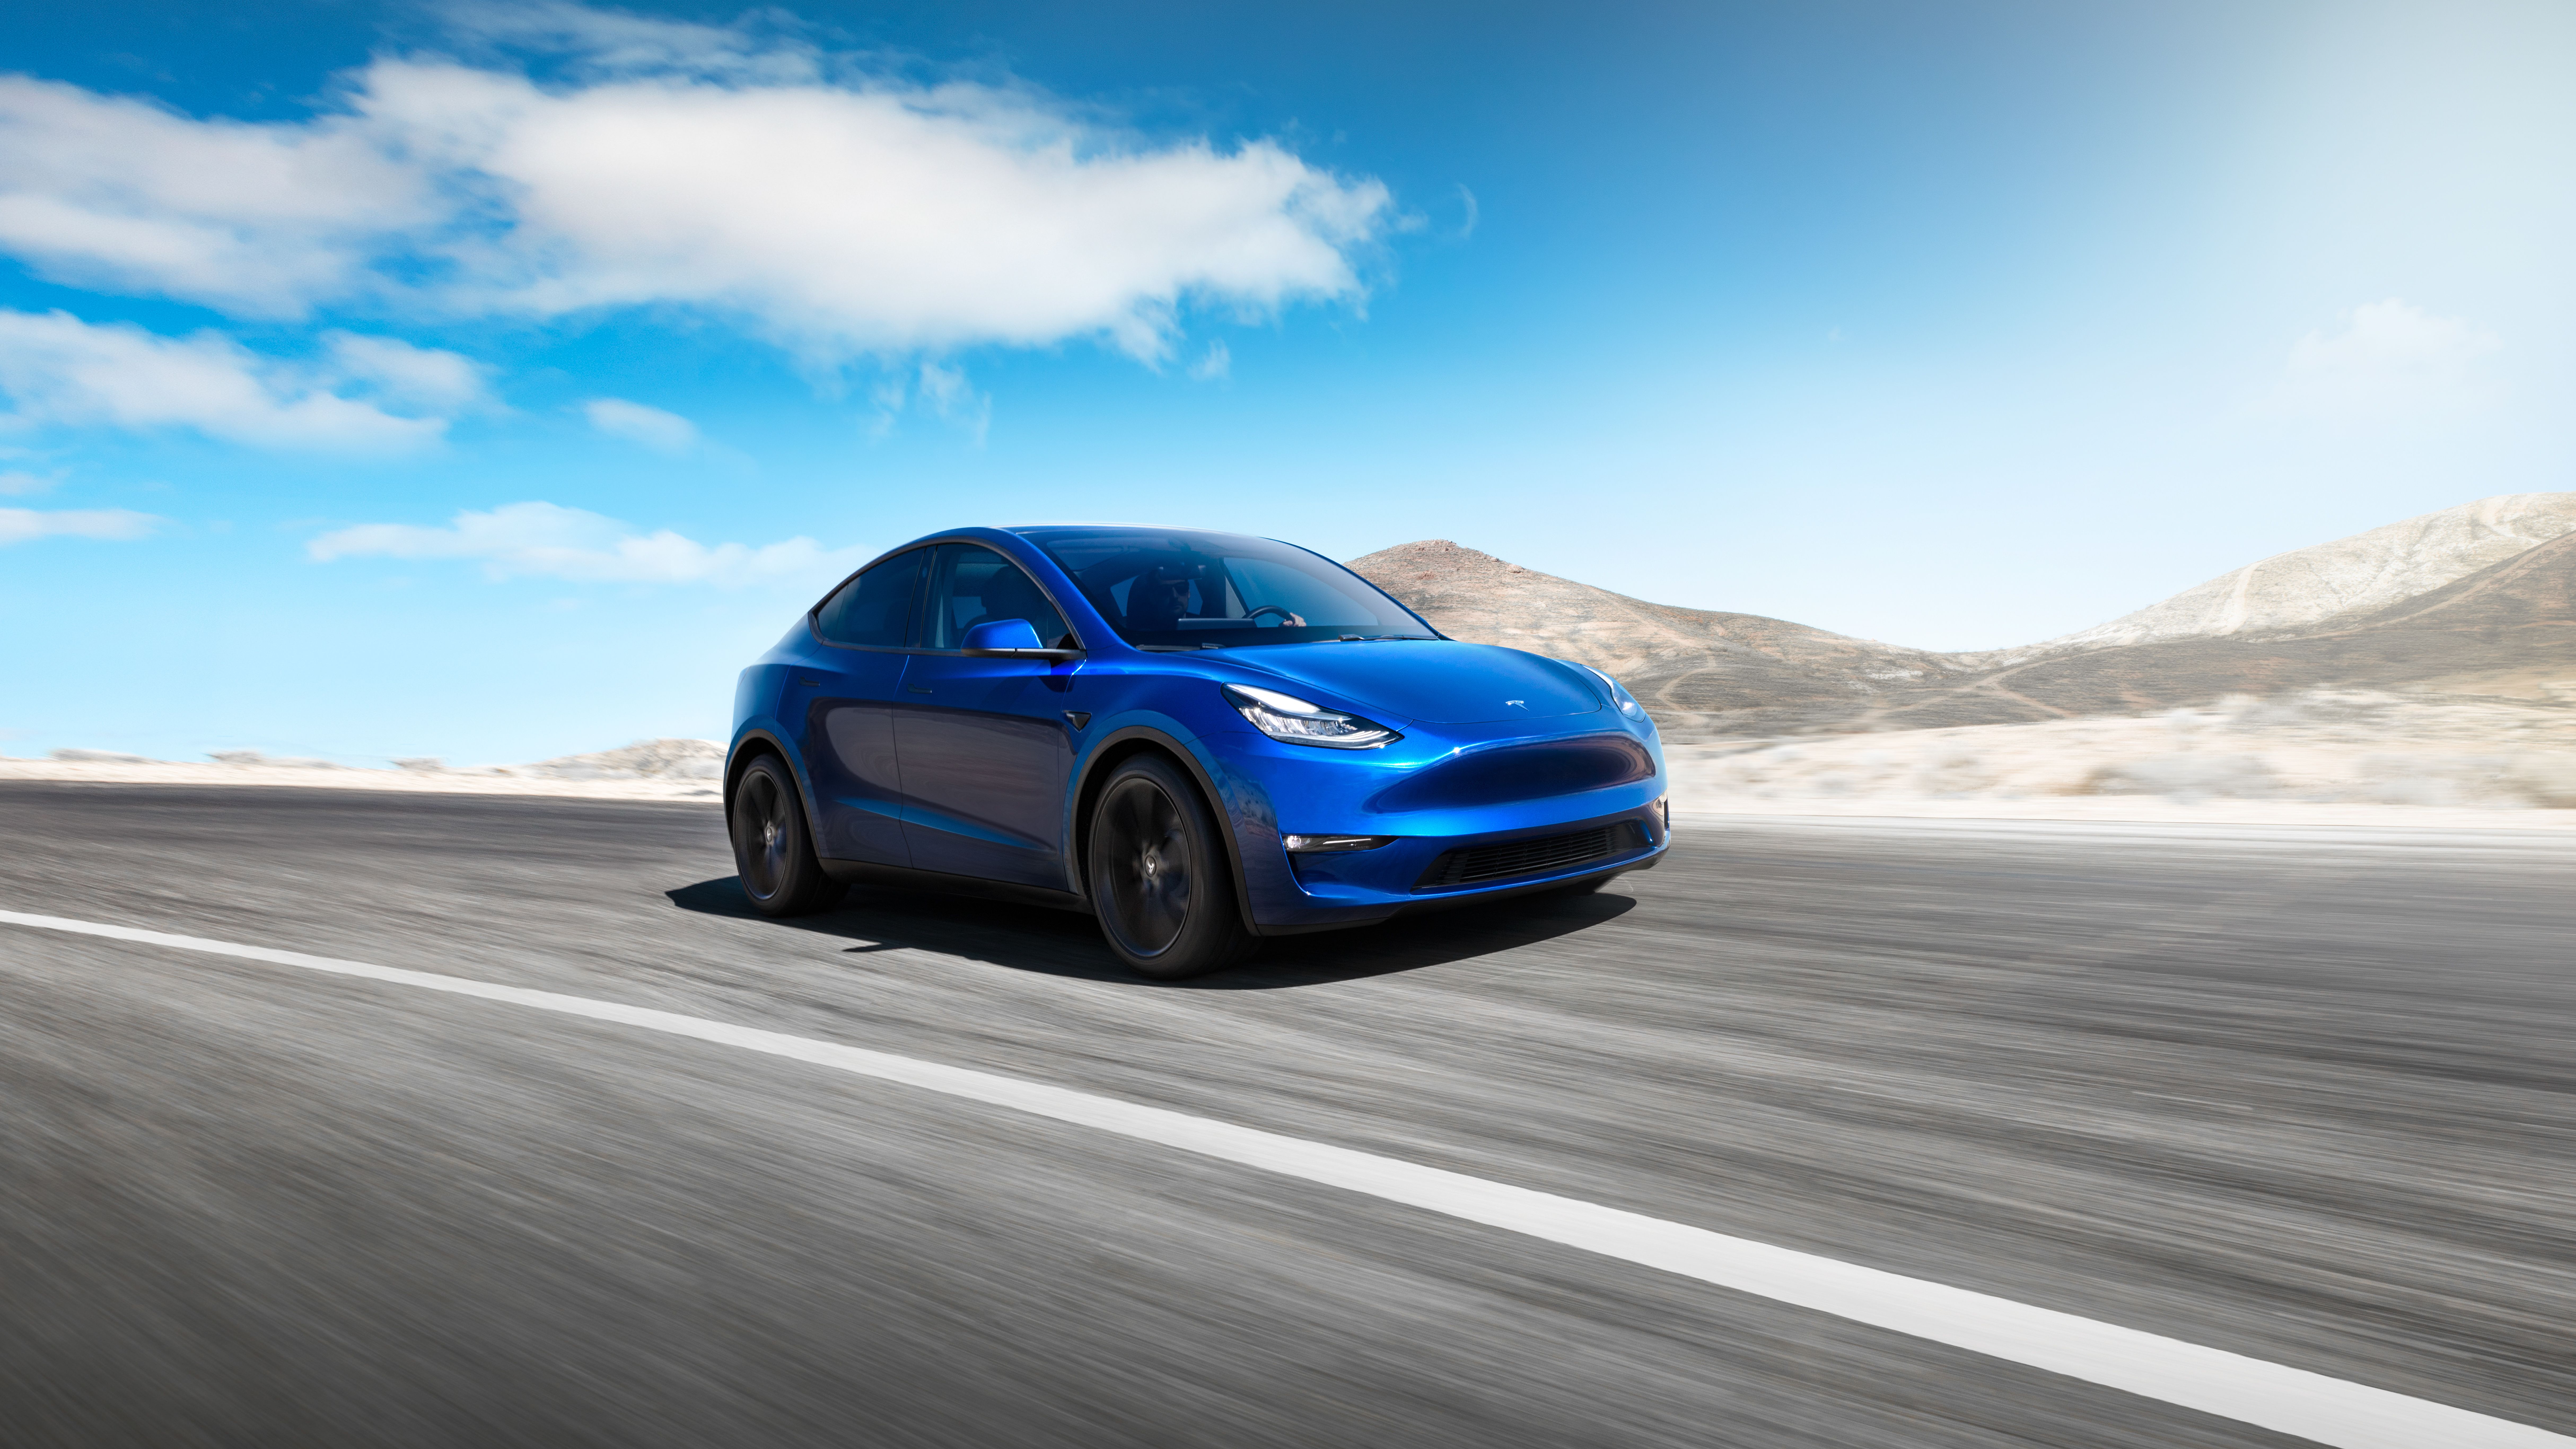 Tesla Model Y: price, specs and battery range for the compact SUV